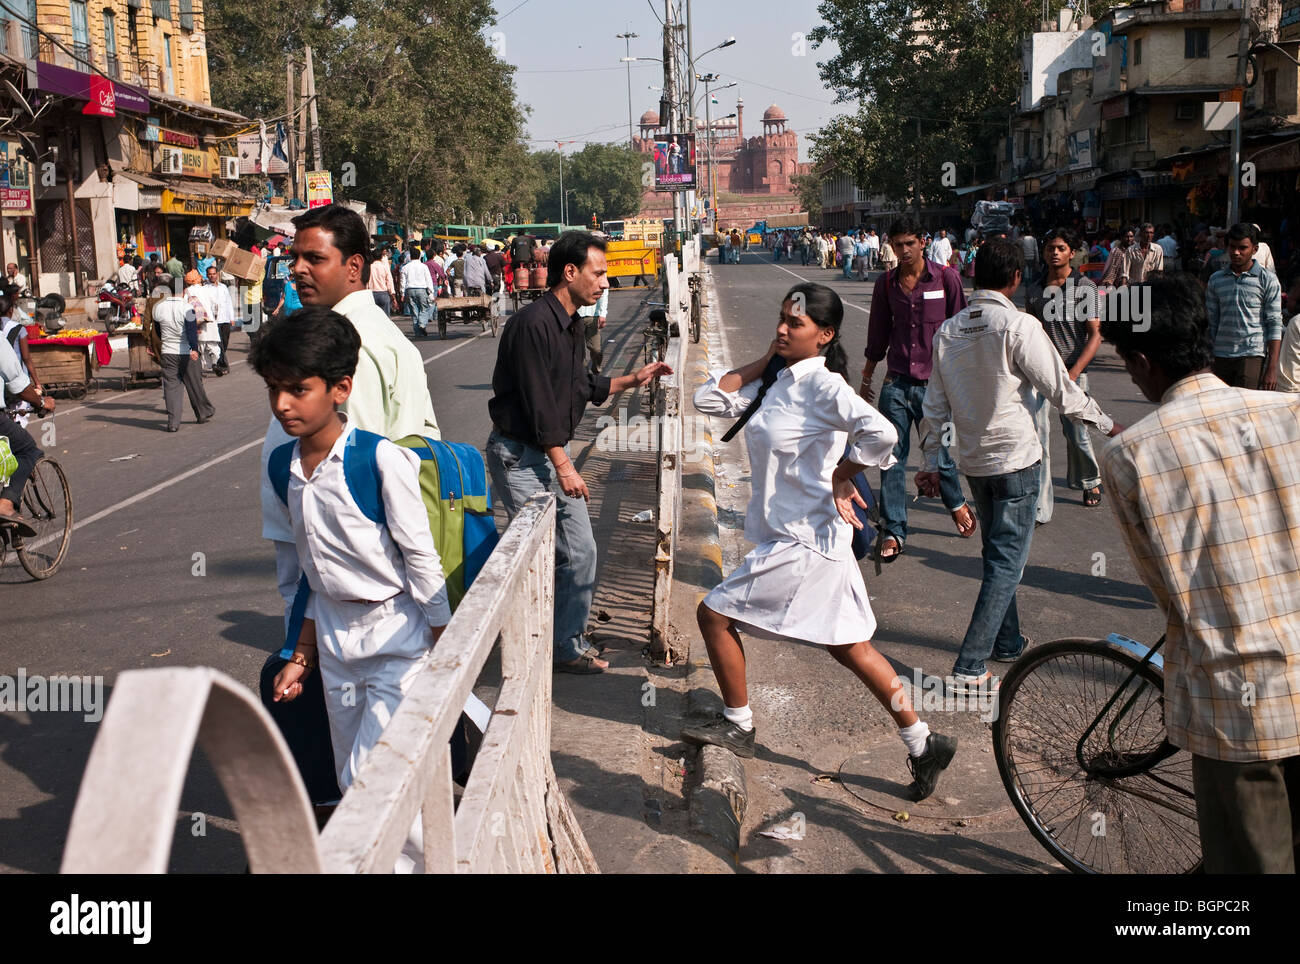 Pedestrians crossing the central reservation in Chandni Chowk.  Busy street scene, Old Delhi, India Stock Photo